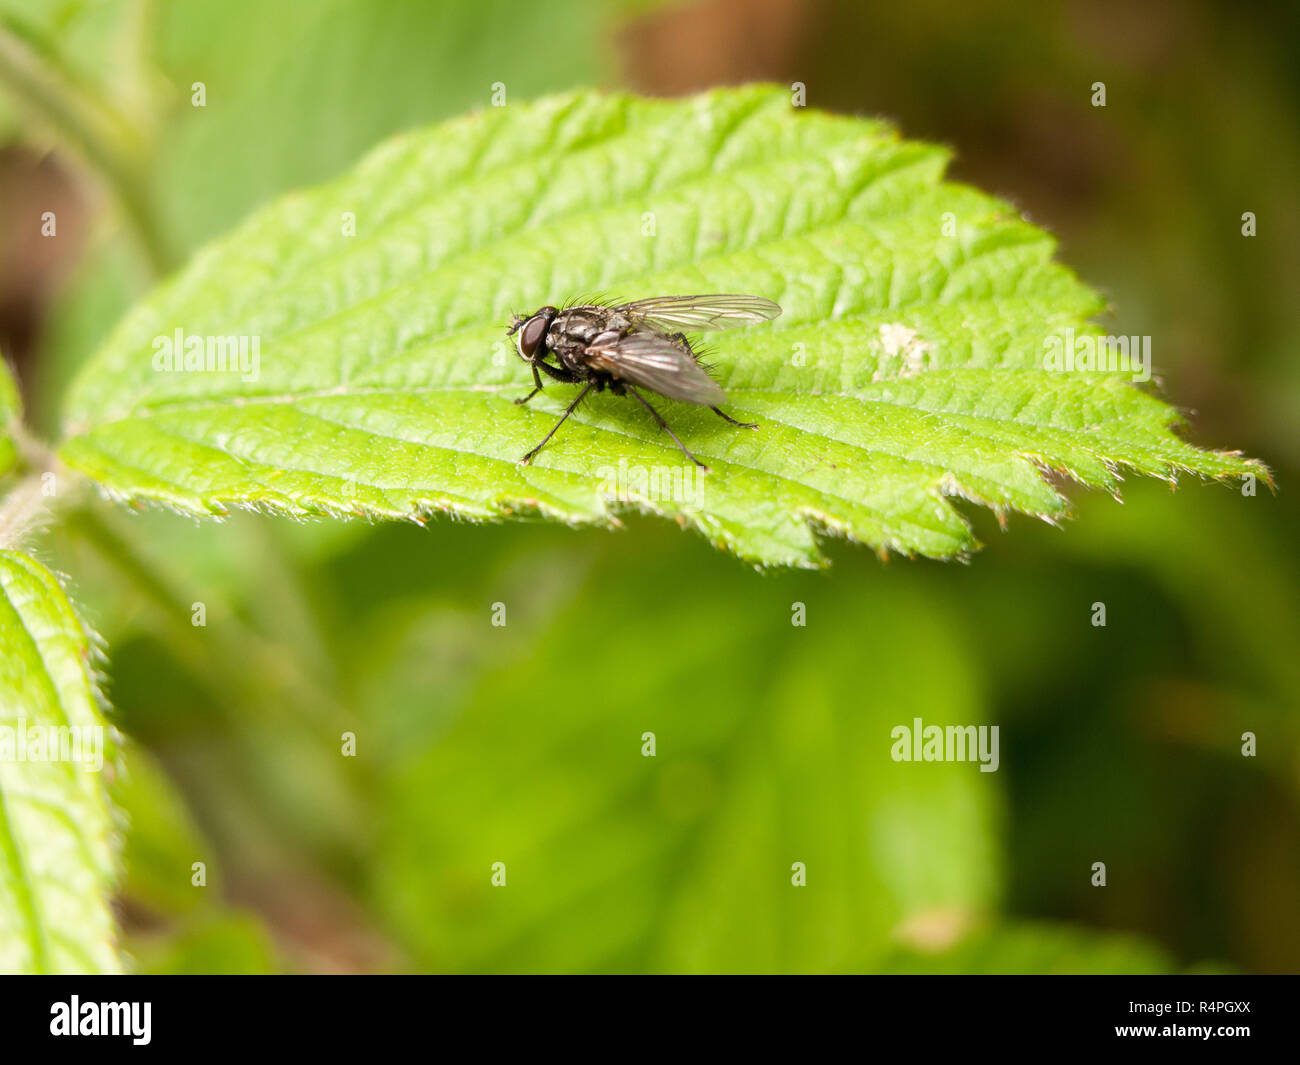 a normal common fly outside in the forest restin upon a leaf close up macro with full crisp and sharp detail Stock Photo